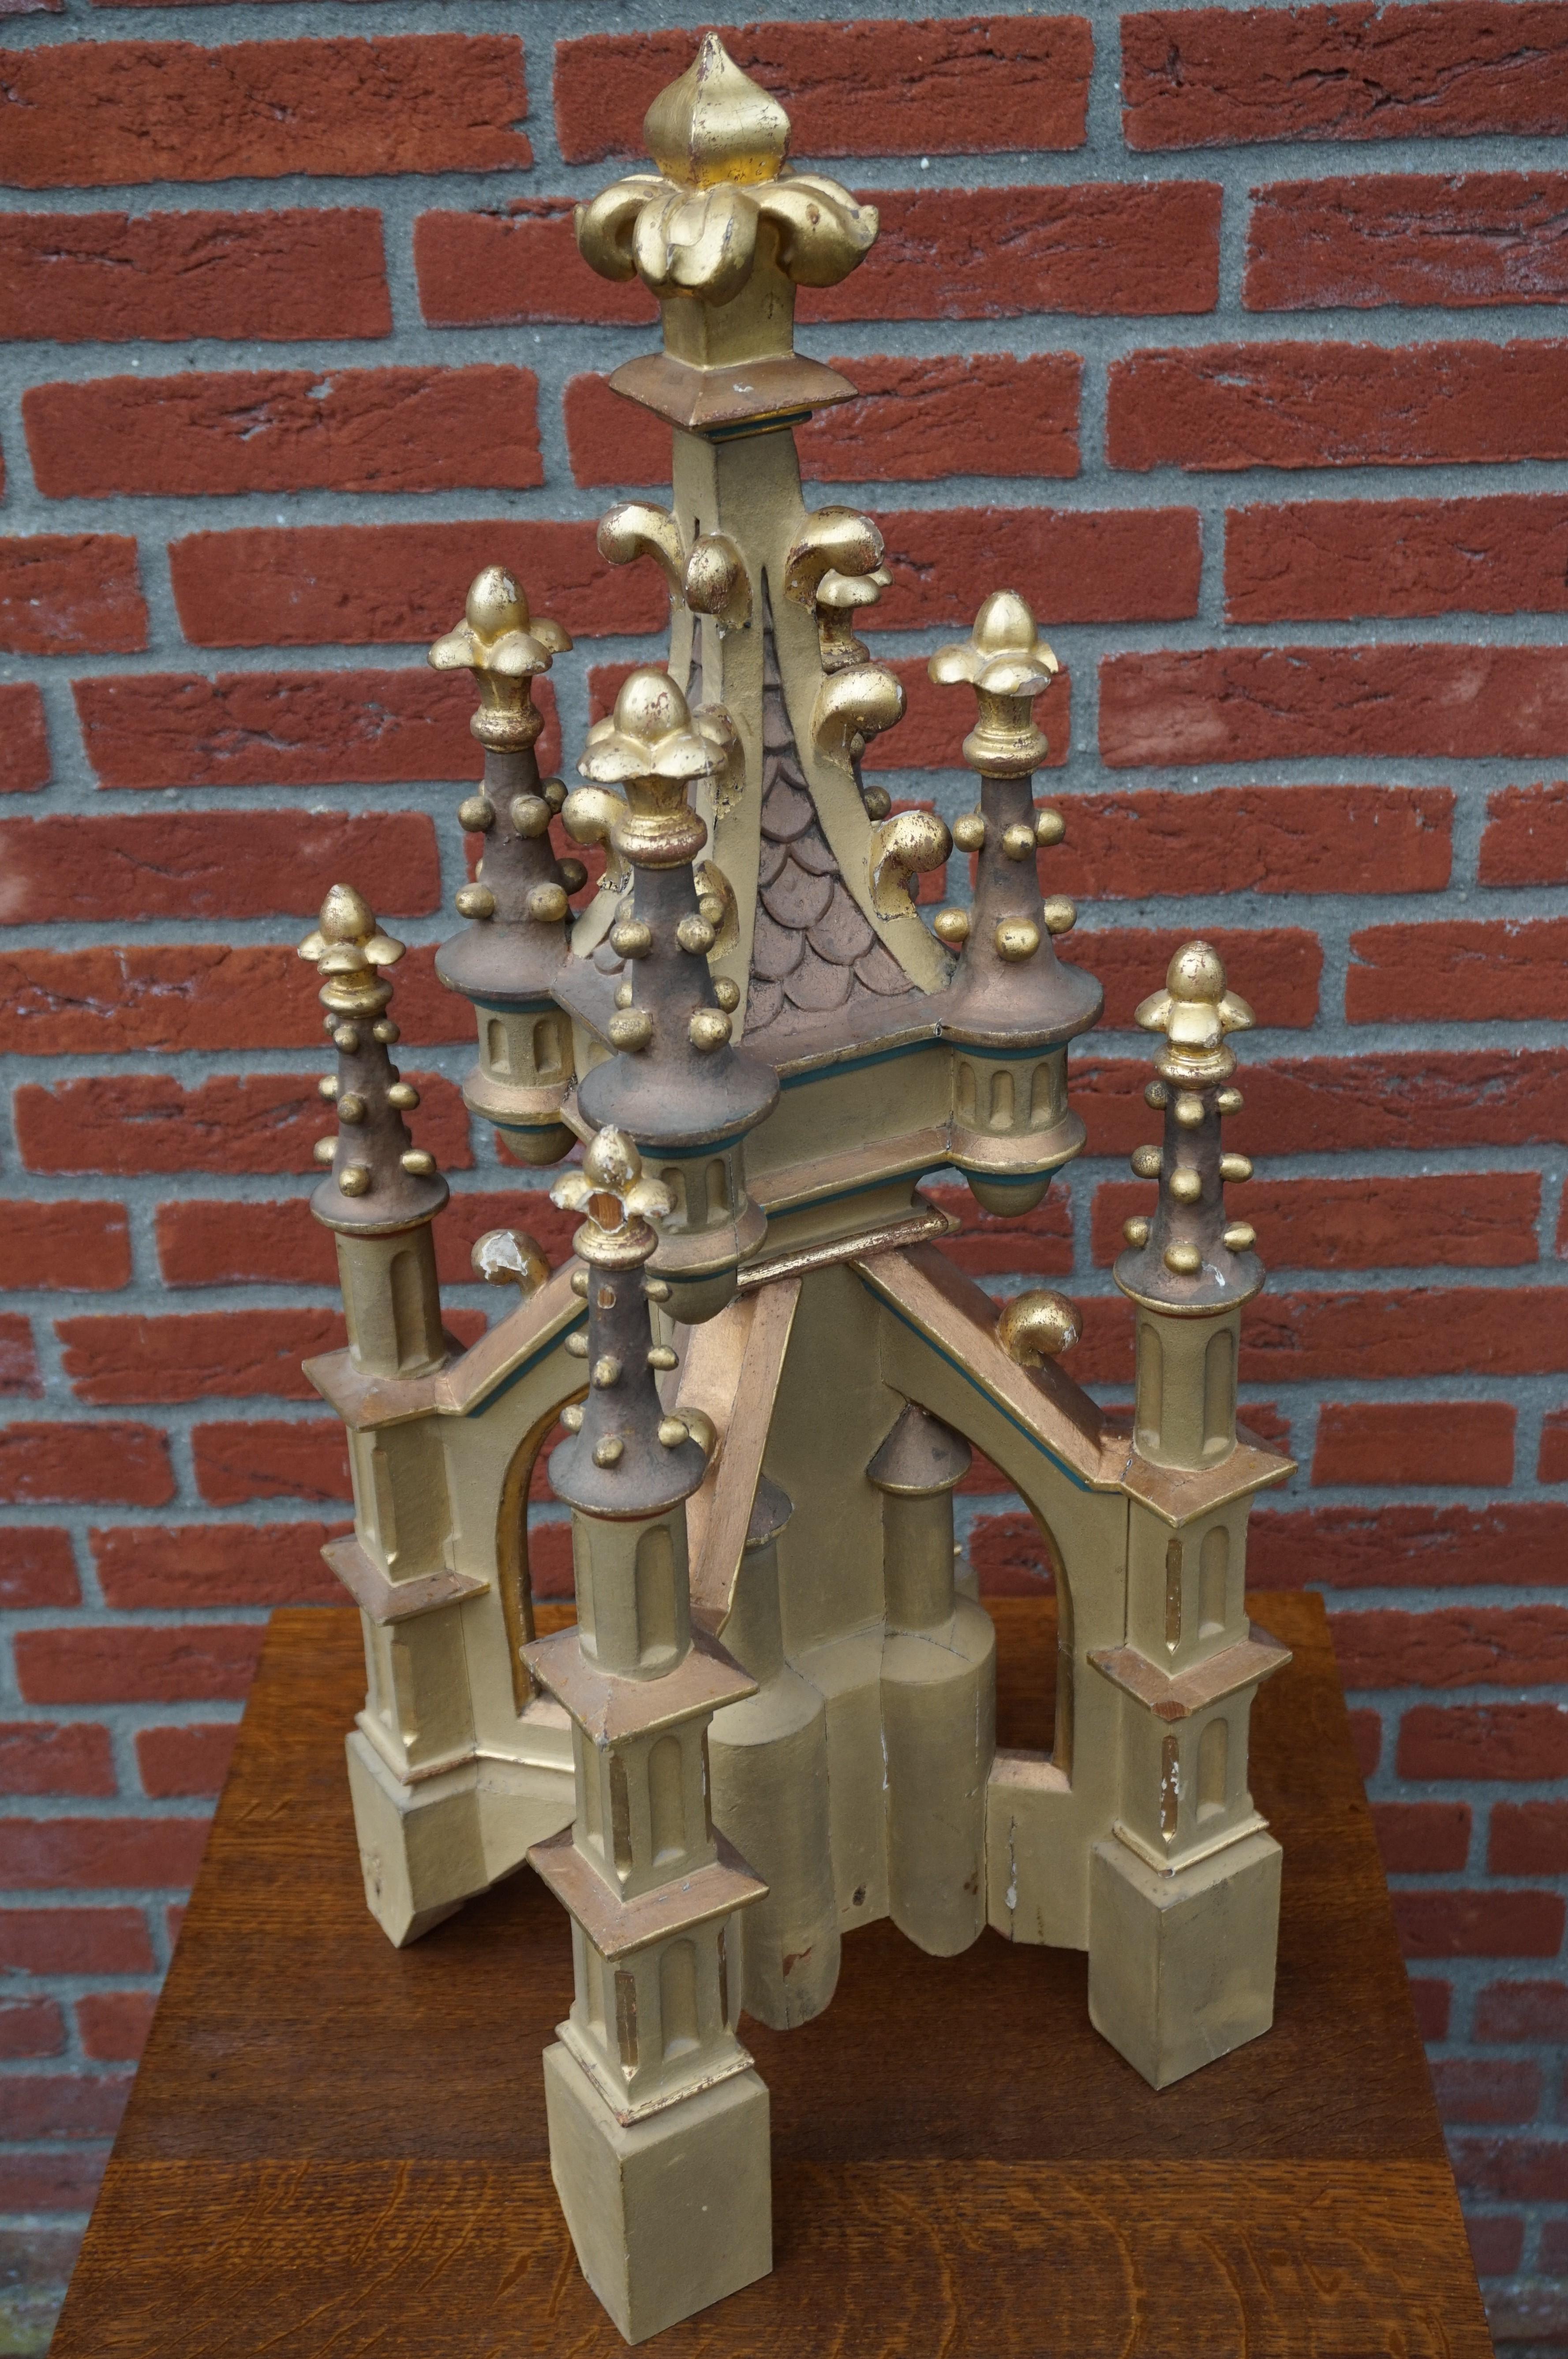 Architectural model-like Gothic church tower from circa 1900.

This beautiful and entirely handcrafted Gothic tower model is another one of our recent great finds. This antique dates back to the earliest years of the 20th century and it may have